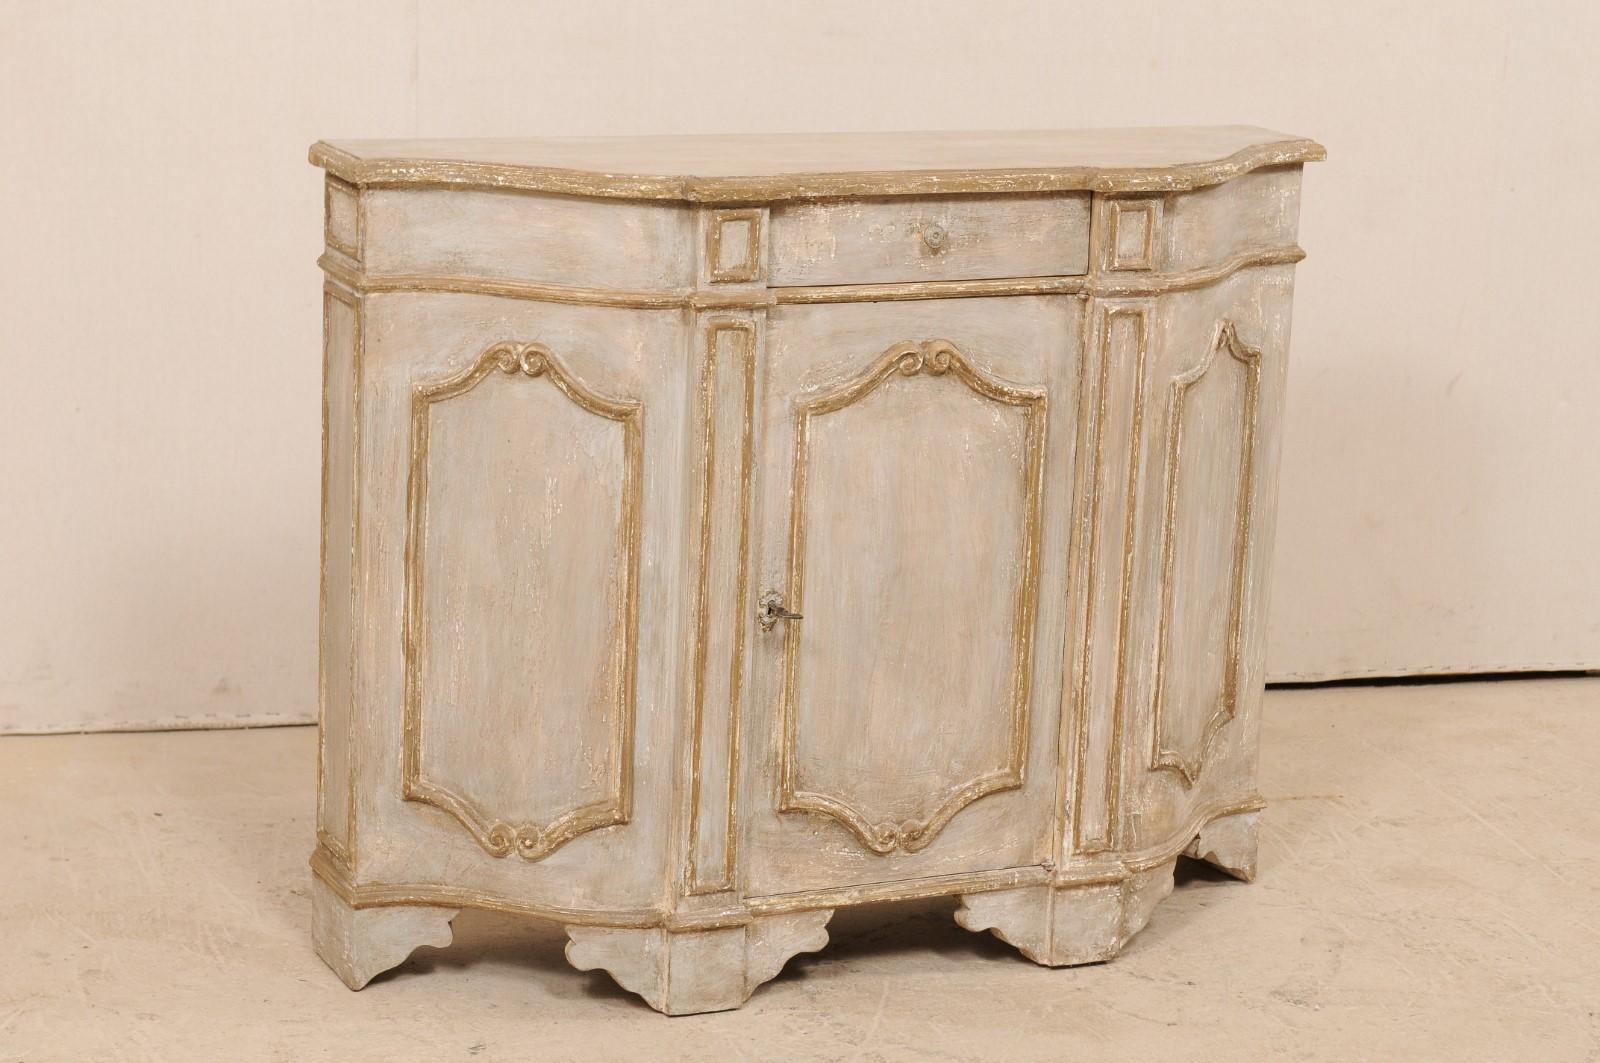 An Italian midcentury painted wood console chest. This small-sized vintage cabinet from Italy features a beautifully scalloped and projected front with top mimicking the shape beneath. The case is trimmed with three panels, each featuring volute